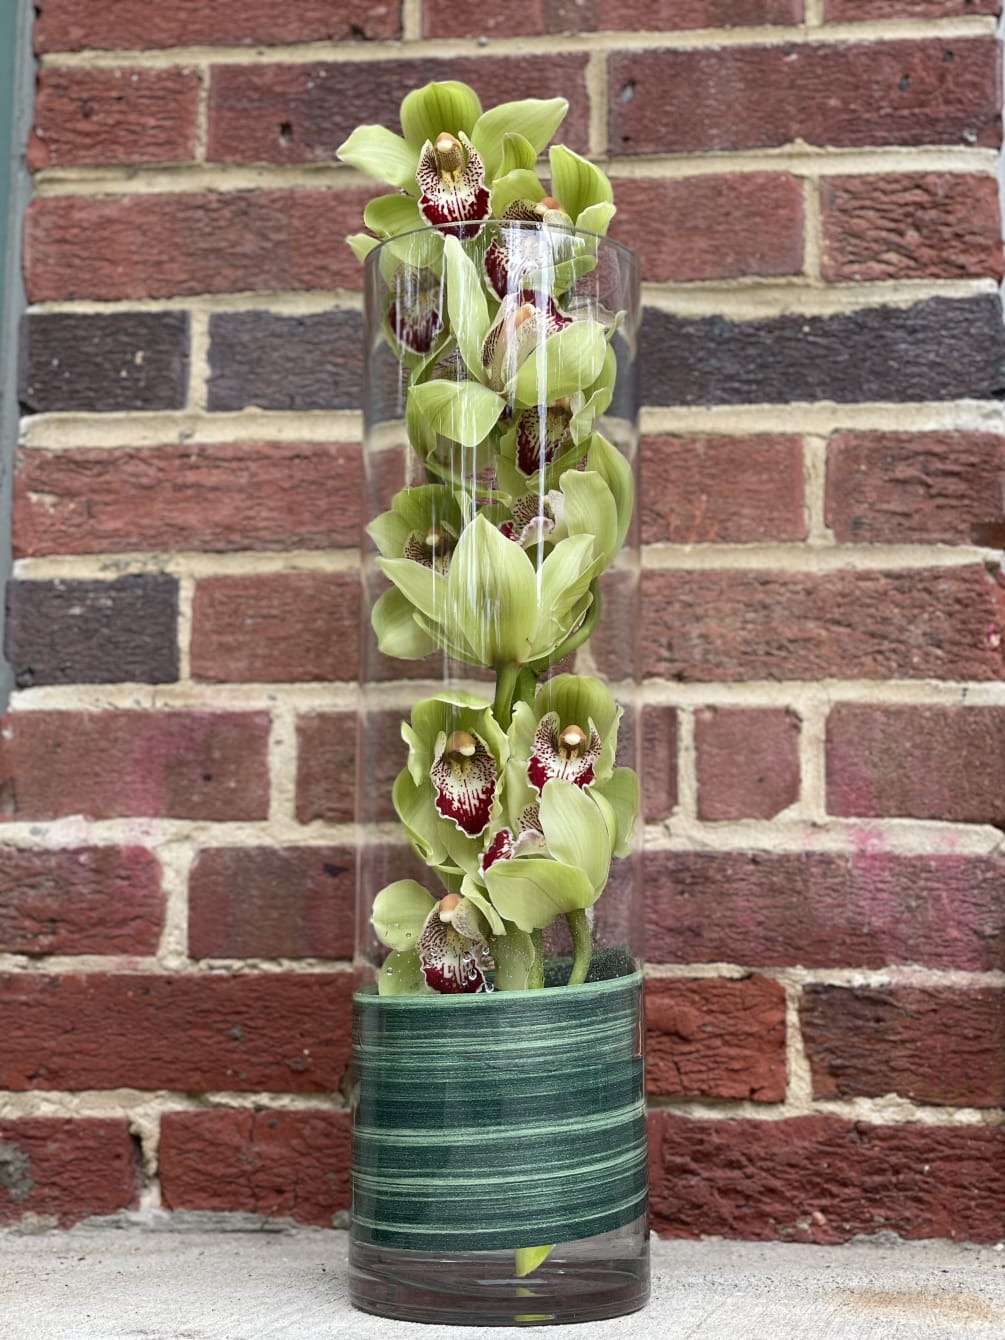 A single cymbidium orchid stem in glass cylinder vase for any special